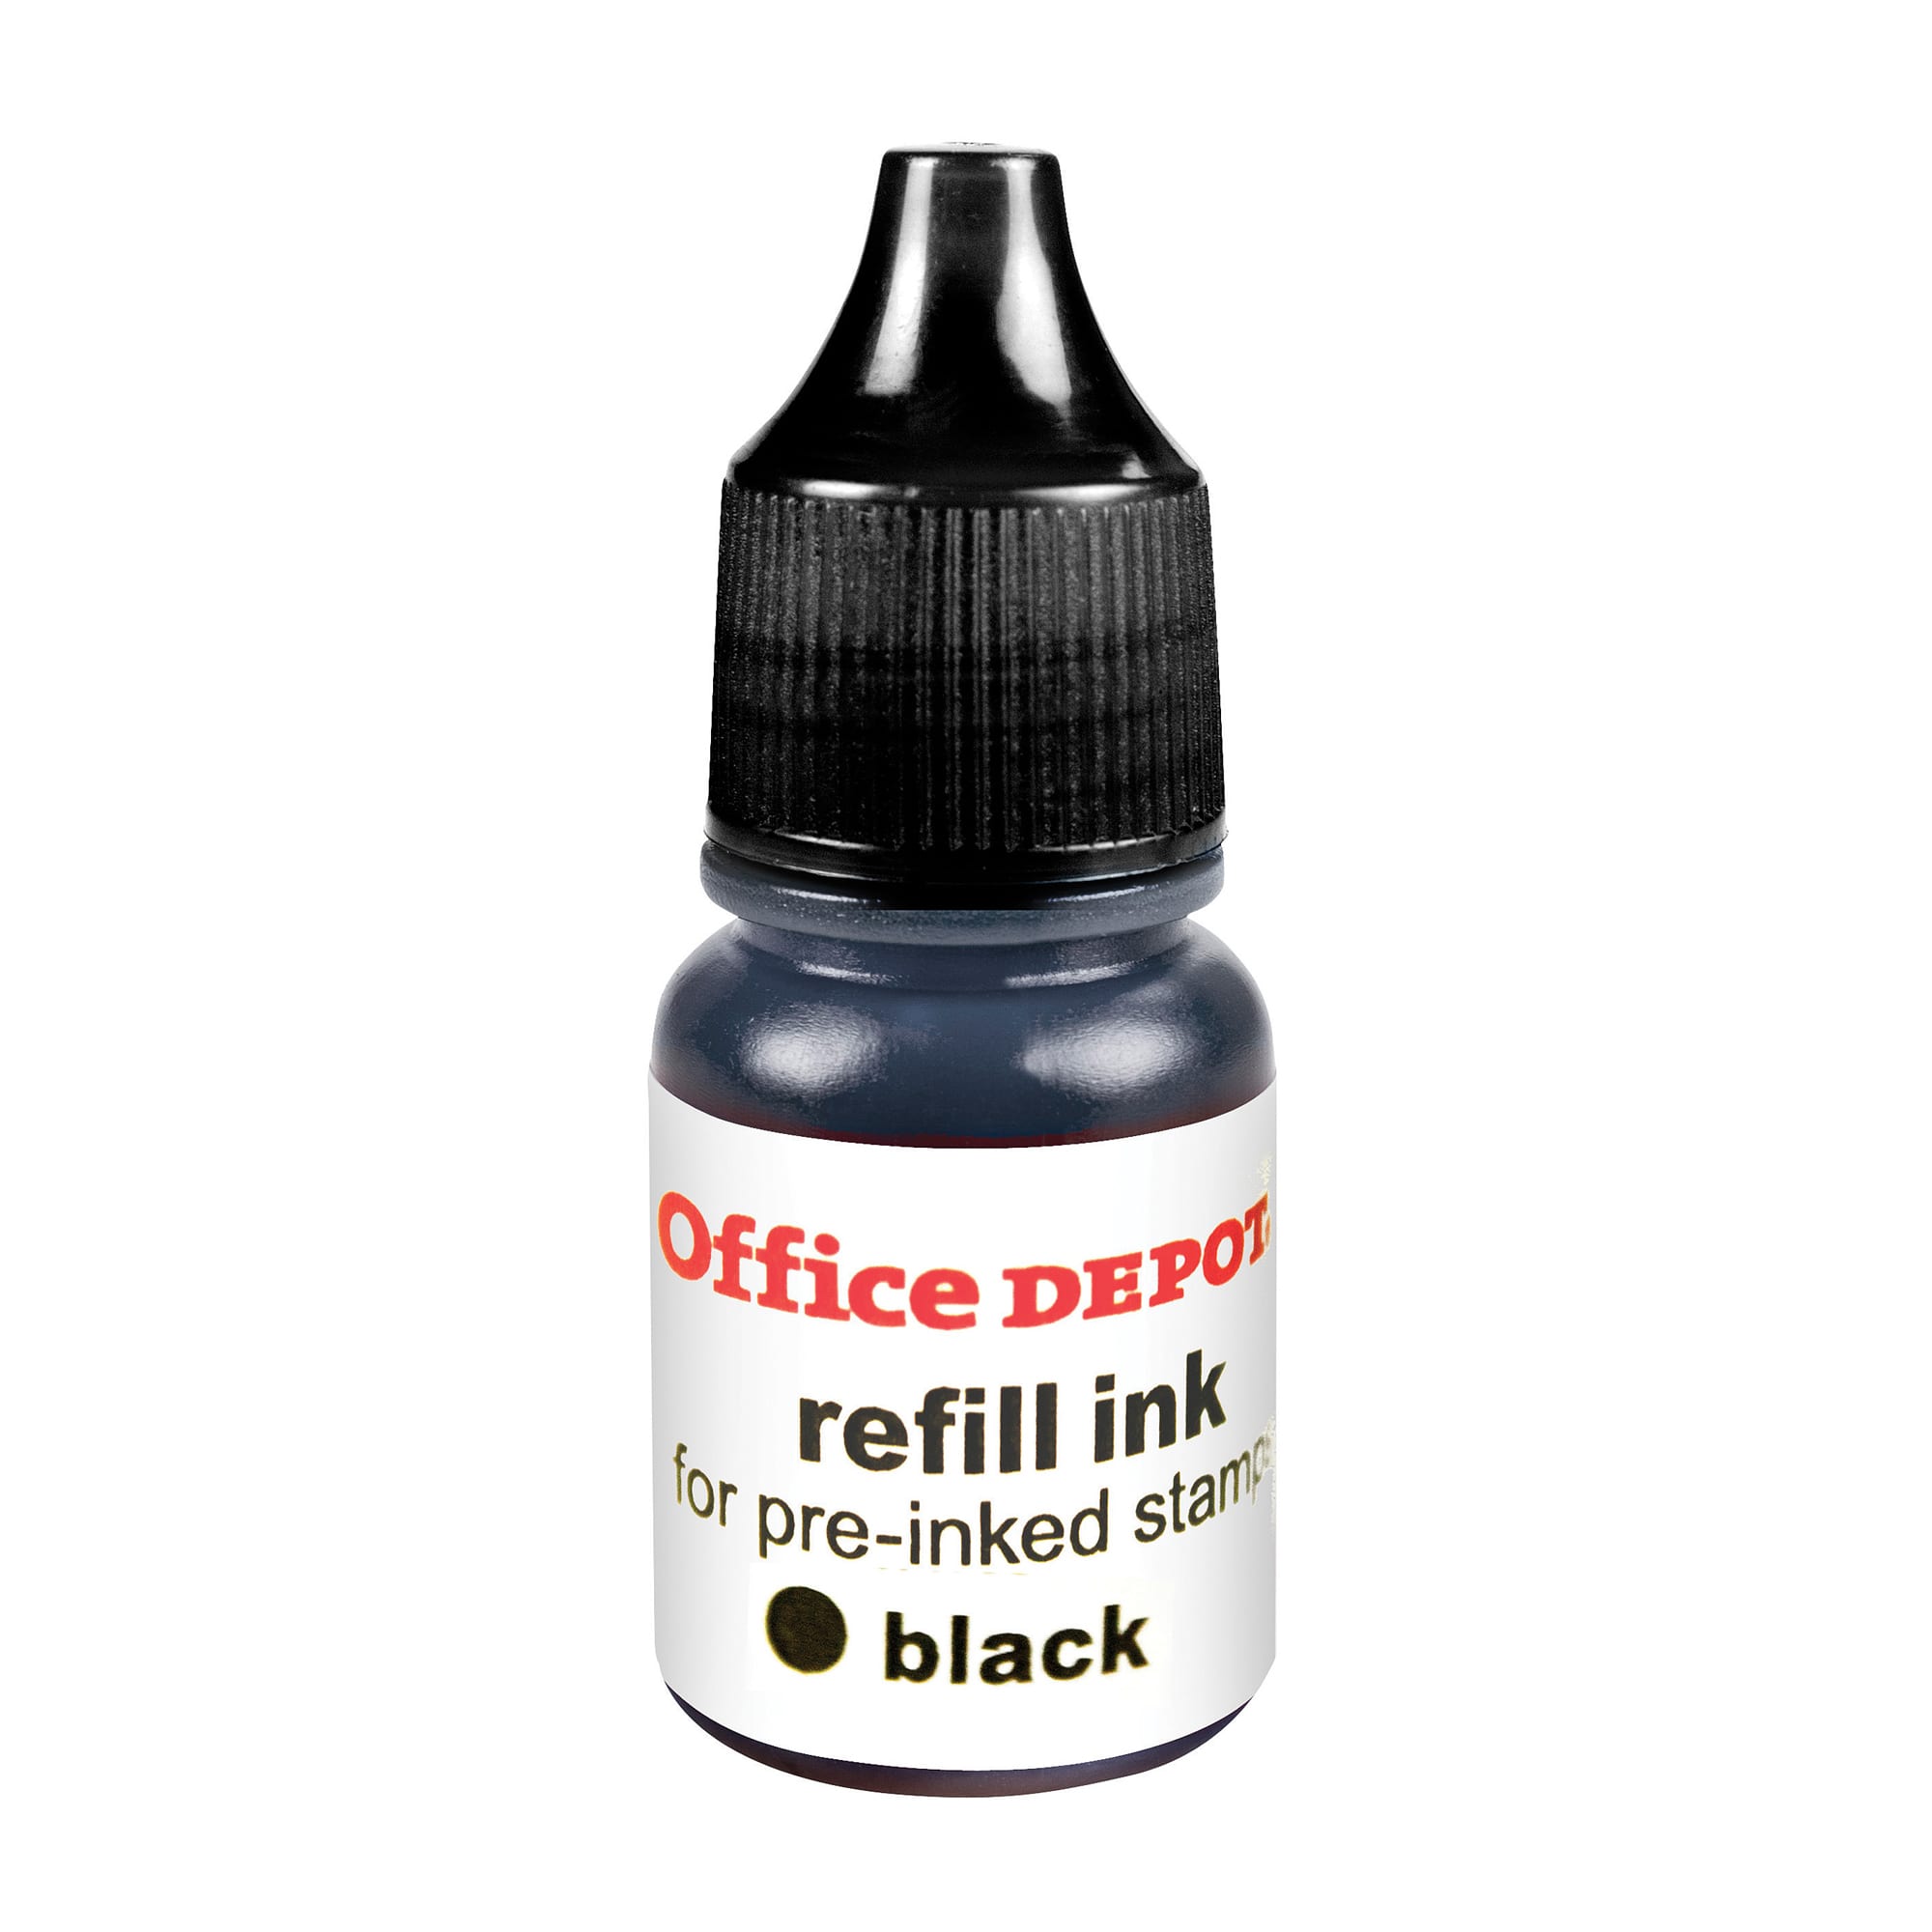 MaxMark Premium Refill Ink for Self Inking Stamps and Stamp Pads, Black Color - 1 oz.